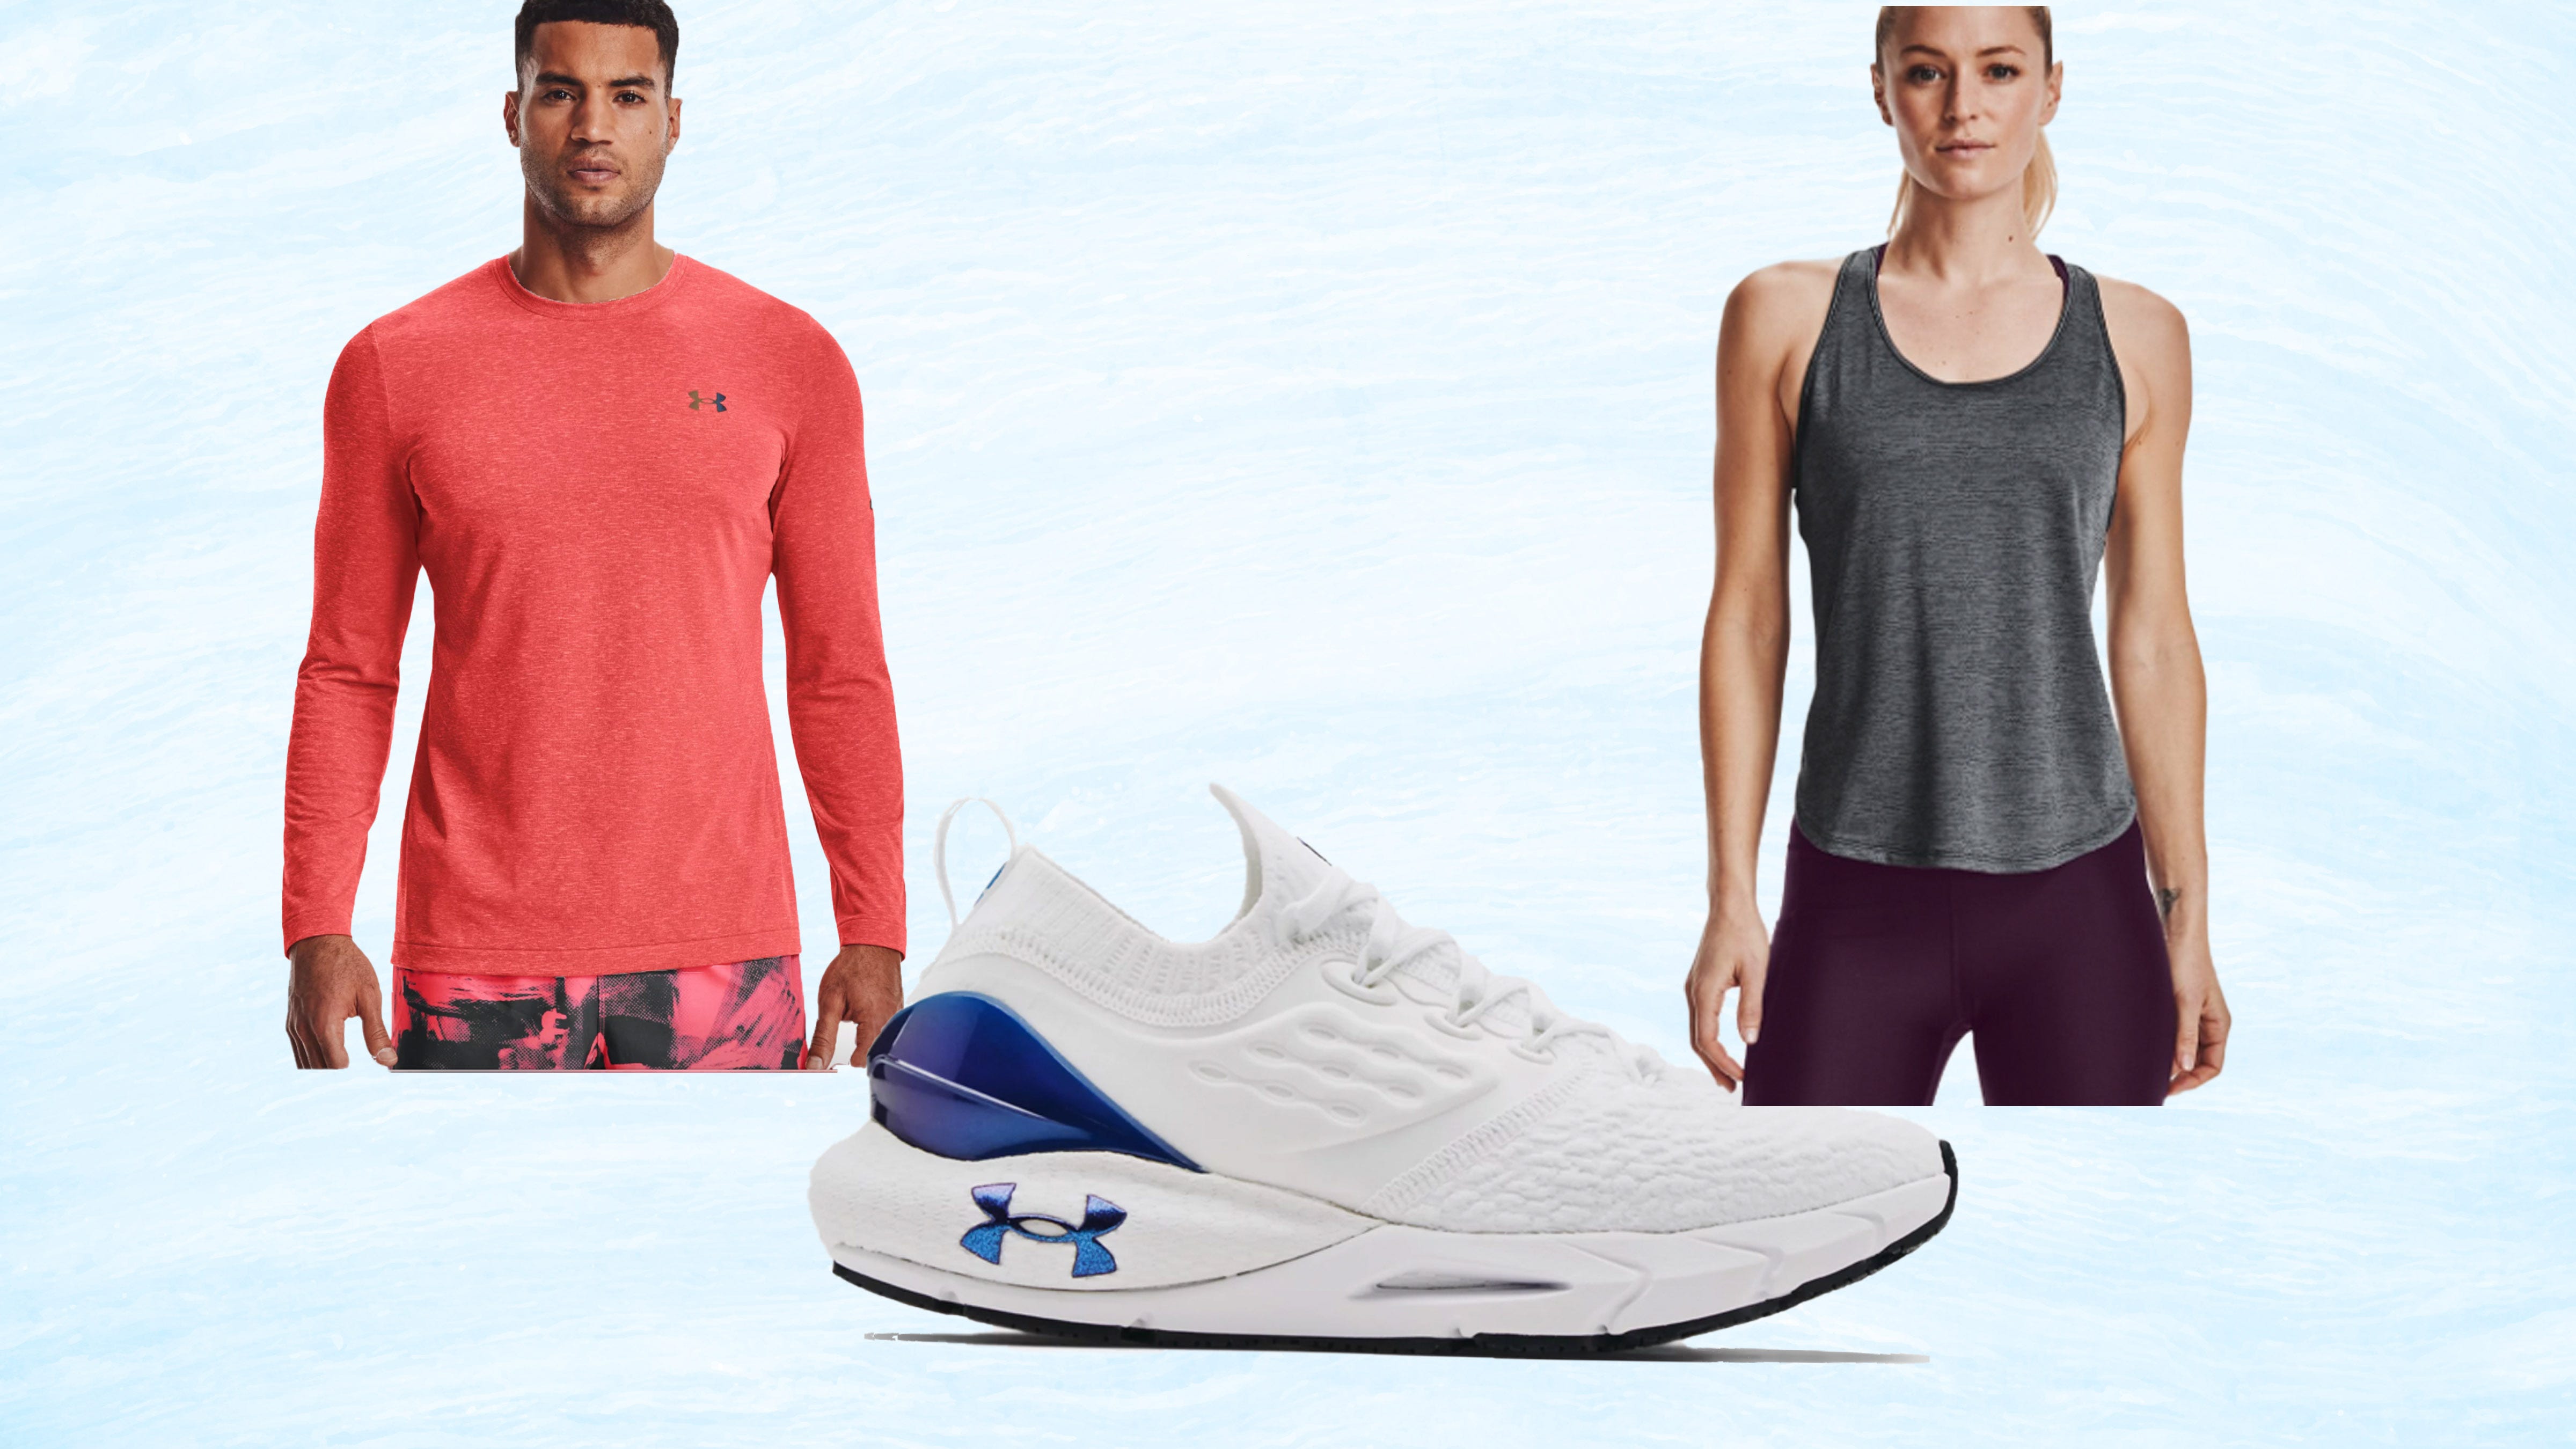 Under Armour Outlet: Get savings on bottoms and